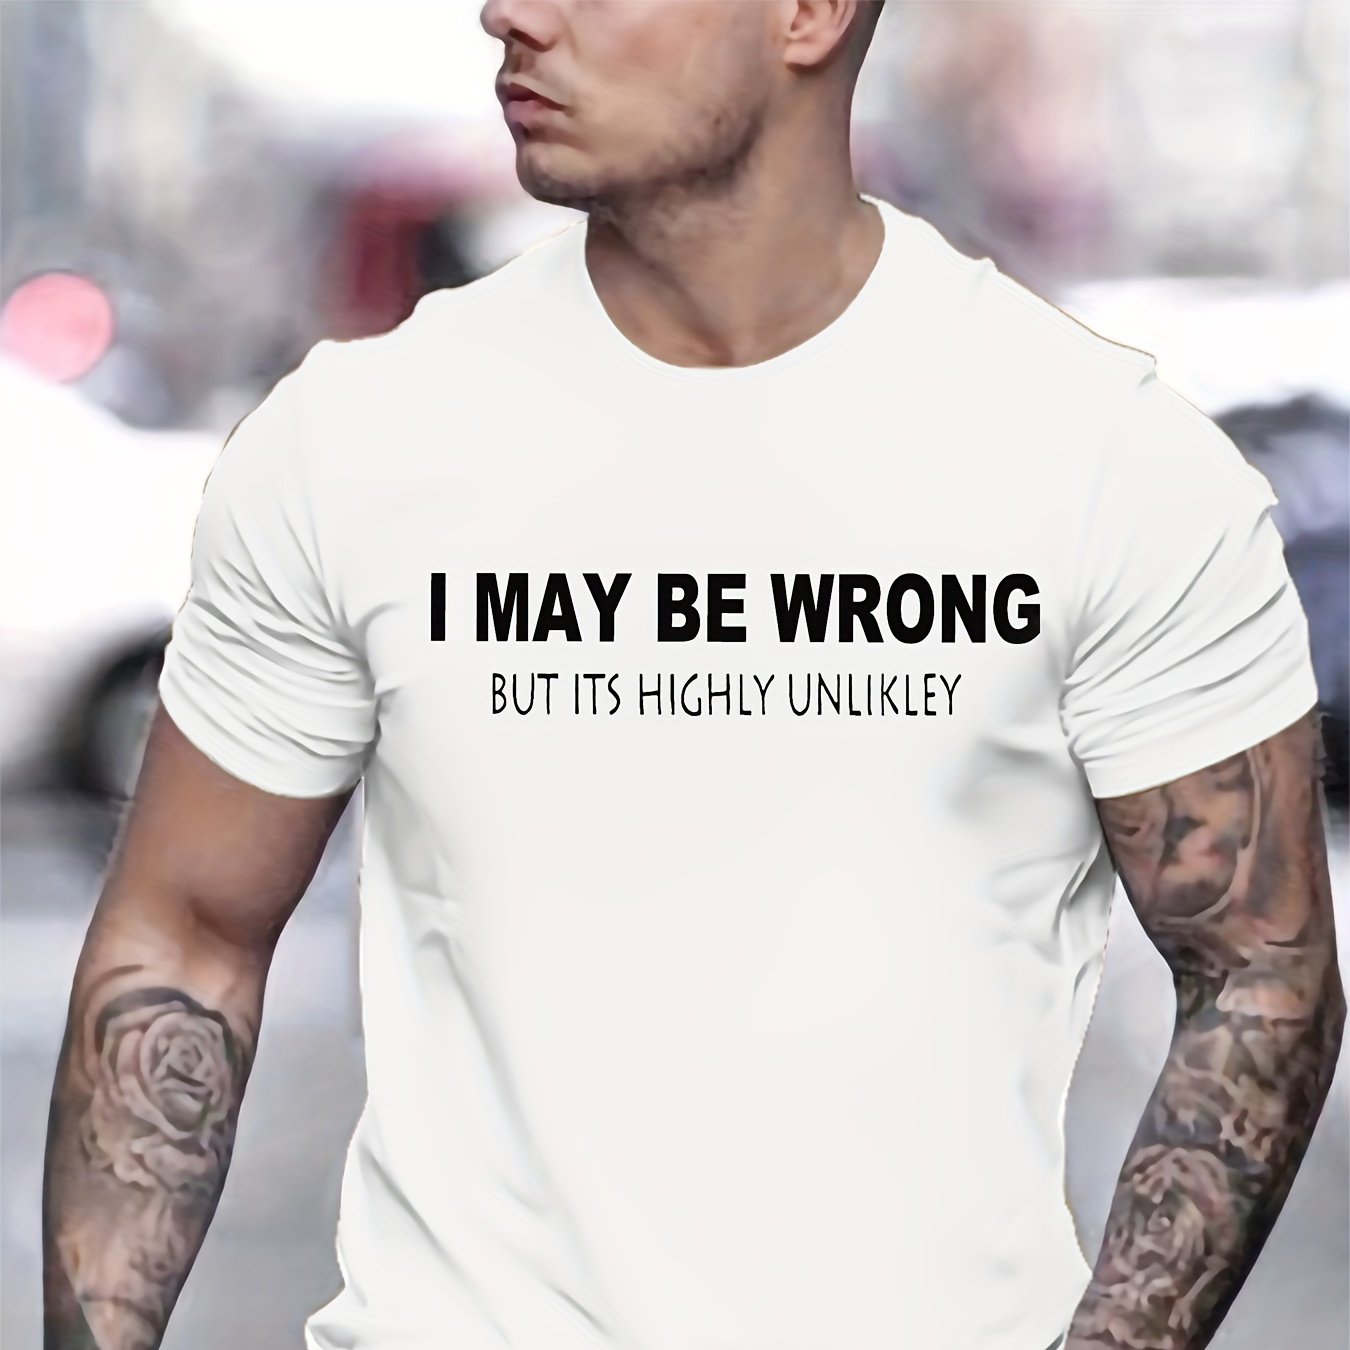 

I May Be Wrong Print Short Sleeve T-shirt For Men, Casual Crew Neck Top, Comfy Versatile & Lightweight Summer Clothing For Daily Wear